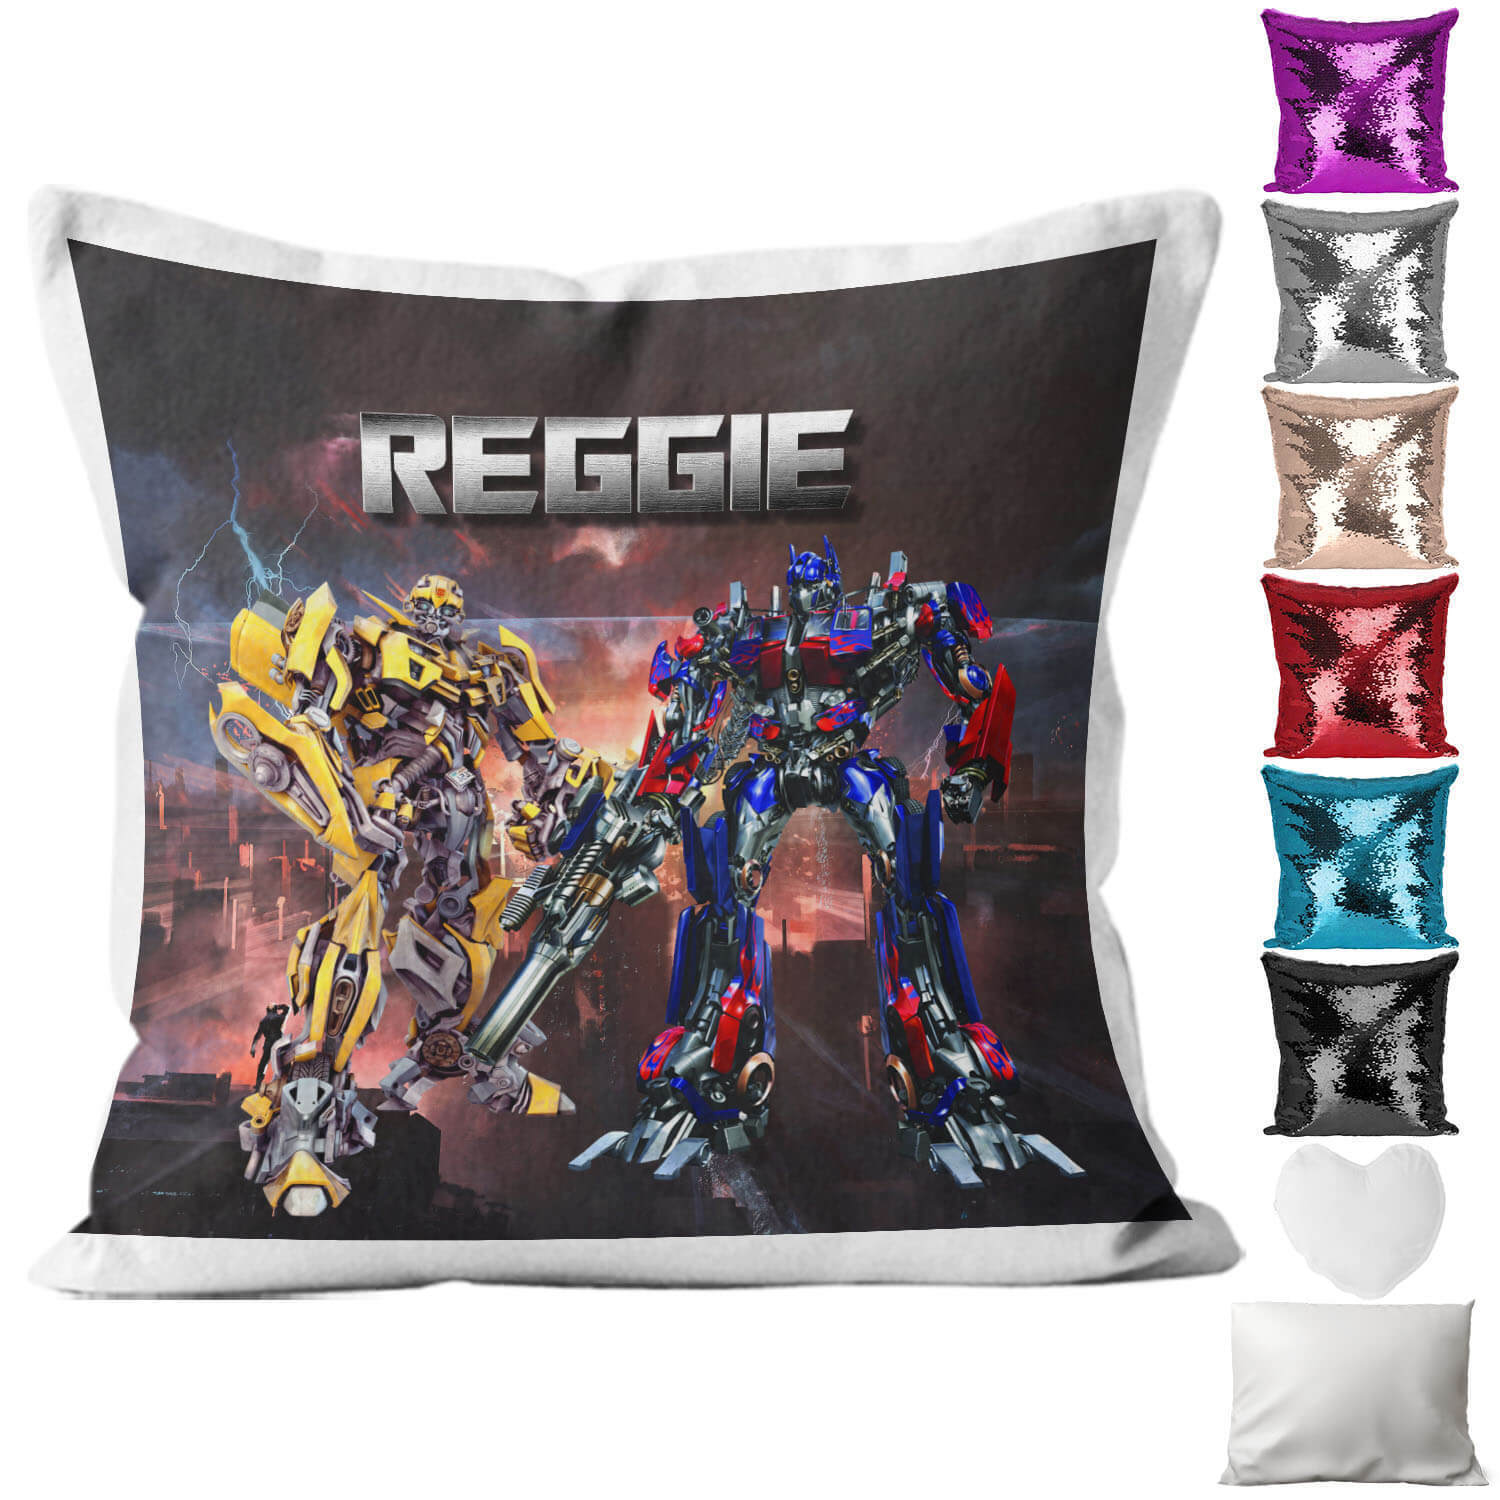 Personalised Cushion Robot Sequin Cushion Pillow Printed Birthday Gift 8